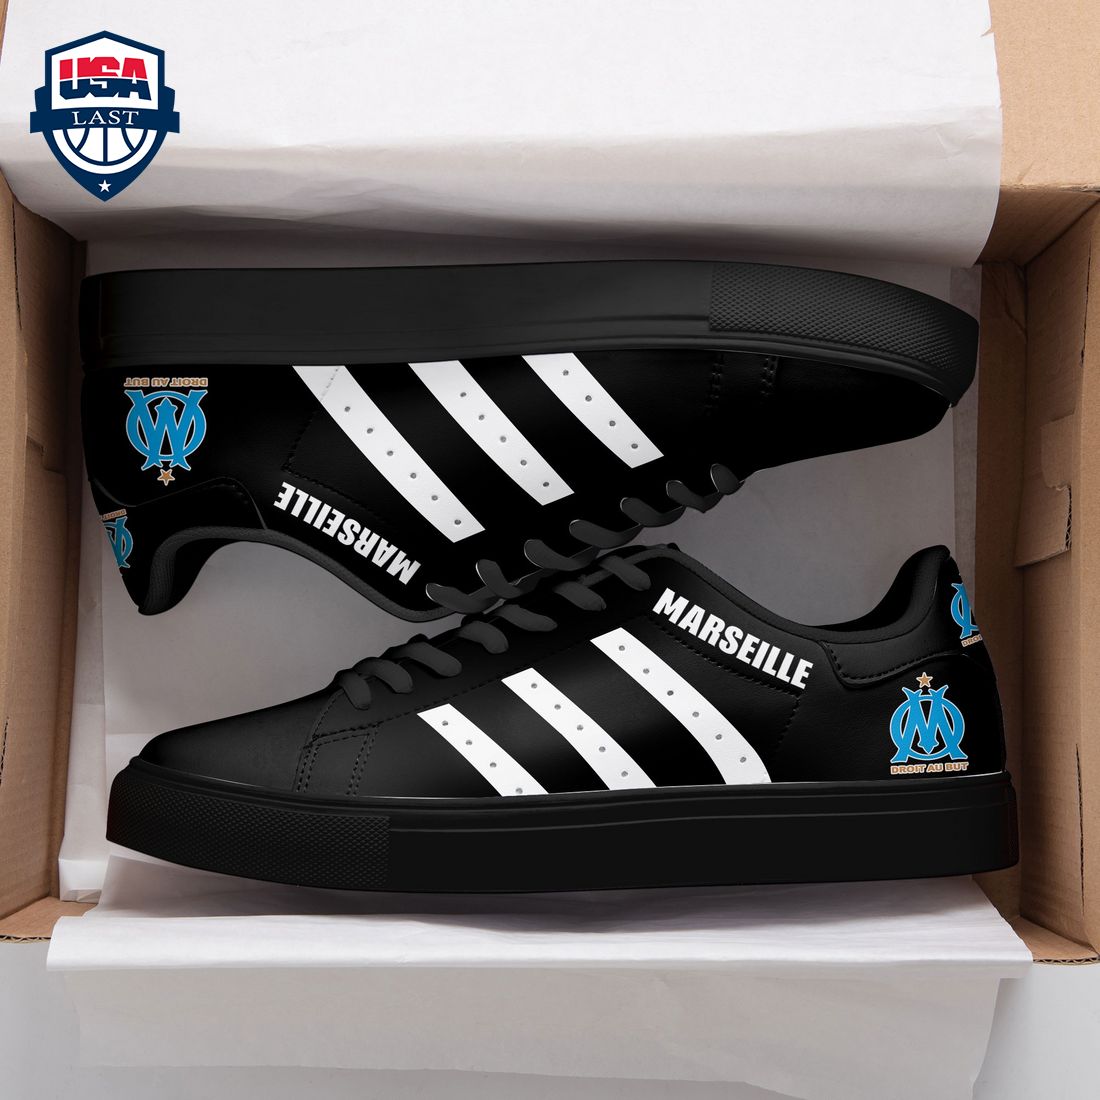 olympique-marseille-white-stripes-style-1-stan-smith-low-top-shoes-1-t7uuk.jpg